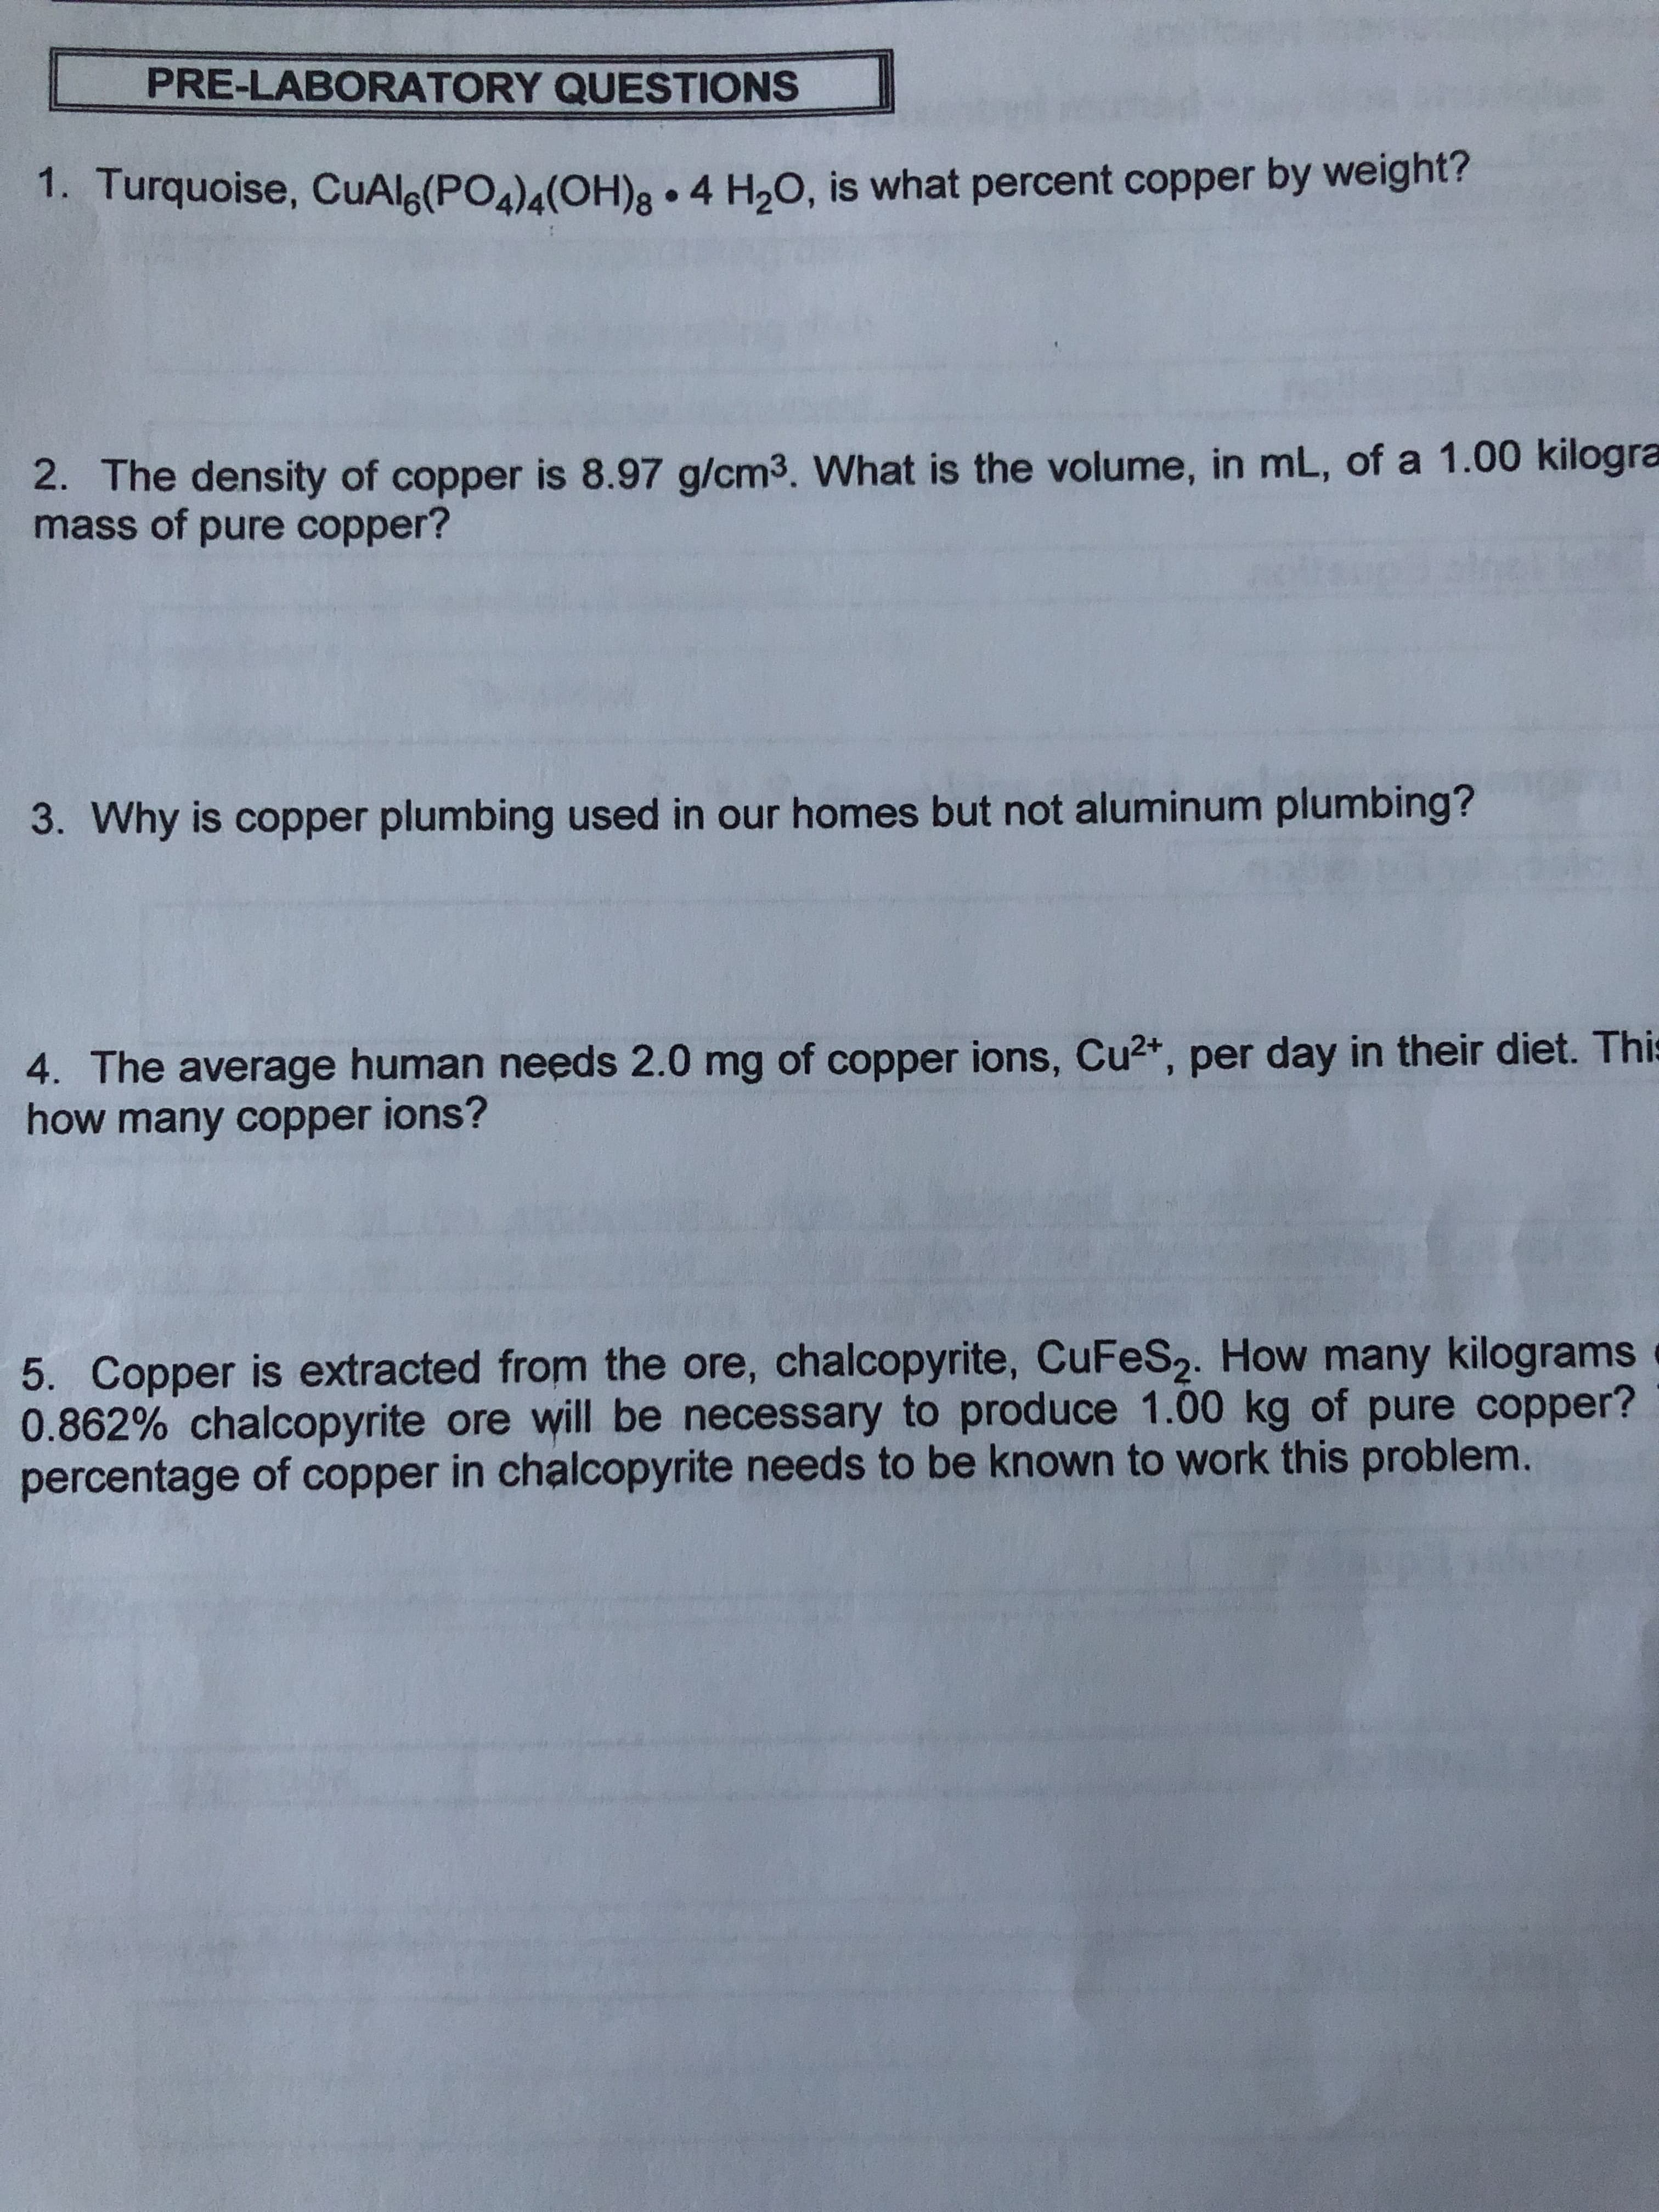 PRE-LABORATORY QUESTIONS
4 H20, is what percent copper by weight?
1. Turquoise, CuAlg(PO4)4(OH)
2. The density of copper is 8.97 g/cm3. What is the volume, in mL, of a 1.00 kilogra
mass of pure copper?
3. Why is copper plumbing used in our homes but not aluminum plumbing?
4. The average human needs 2.0 mg of copper ions, Cu2+, per day in their diet. This
how many copper ions?
5. Copper is extracted from the ore, chalcopyrite, CuFeS2. How many kilograms
0.862% chalcopyrite ore will be necessary to produce 1.00 kg of pure copper?
percentage of copper in chalcopyrite needs to be known to work this problem.
